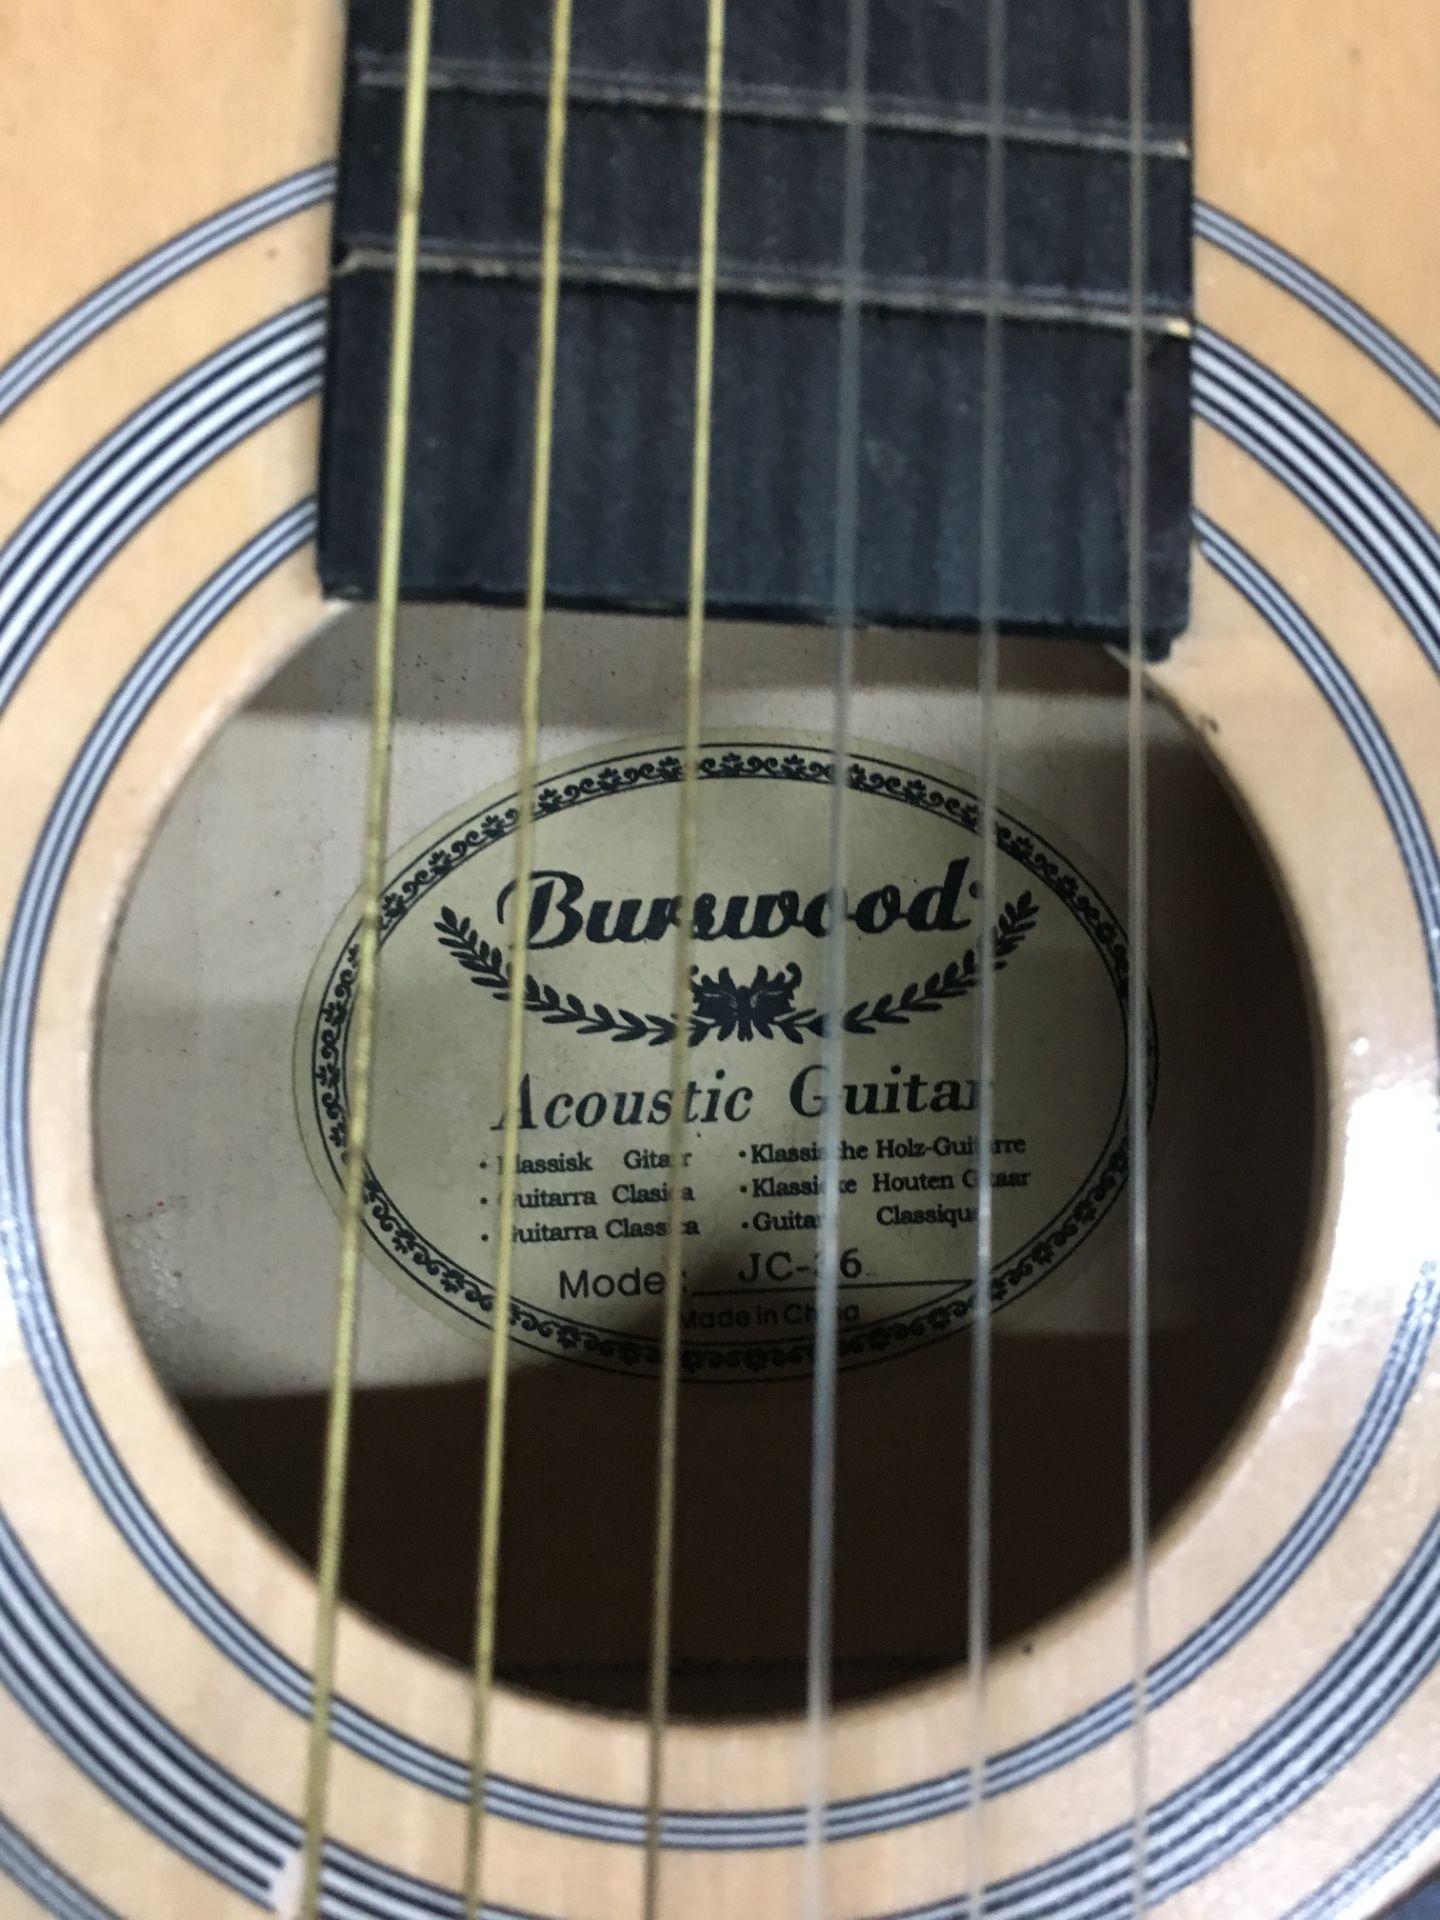 Burswood Jc-36 Acoustic Guitar | In Bag | Used - Image 3 of 3